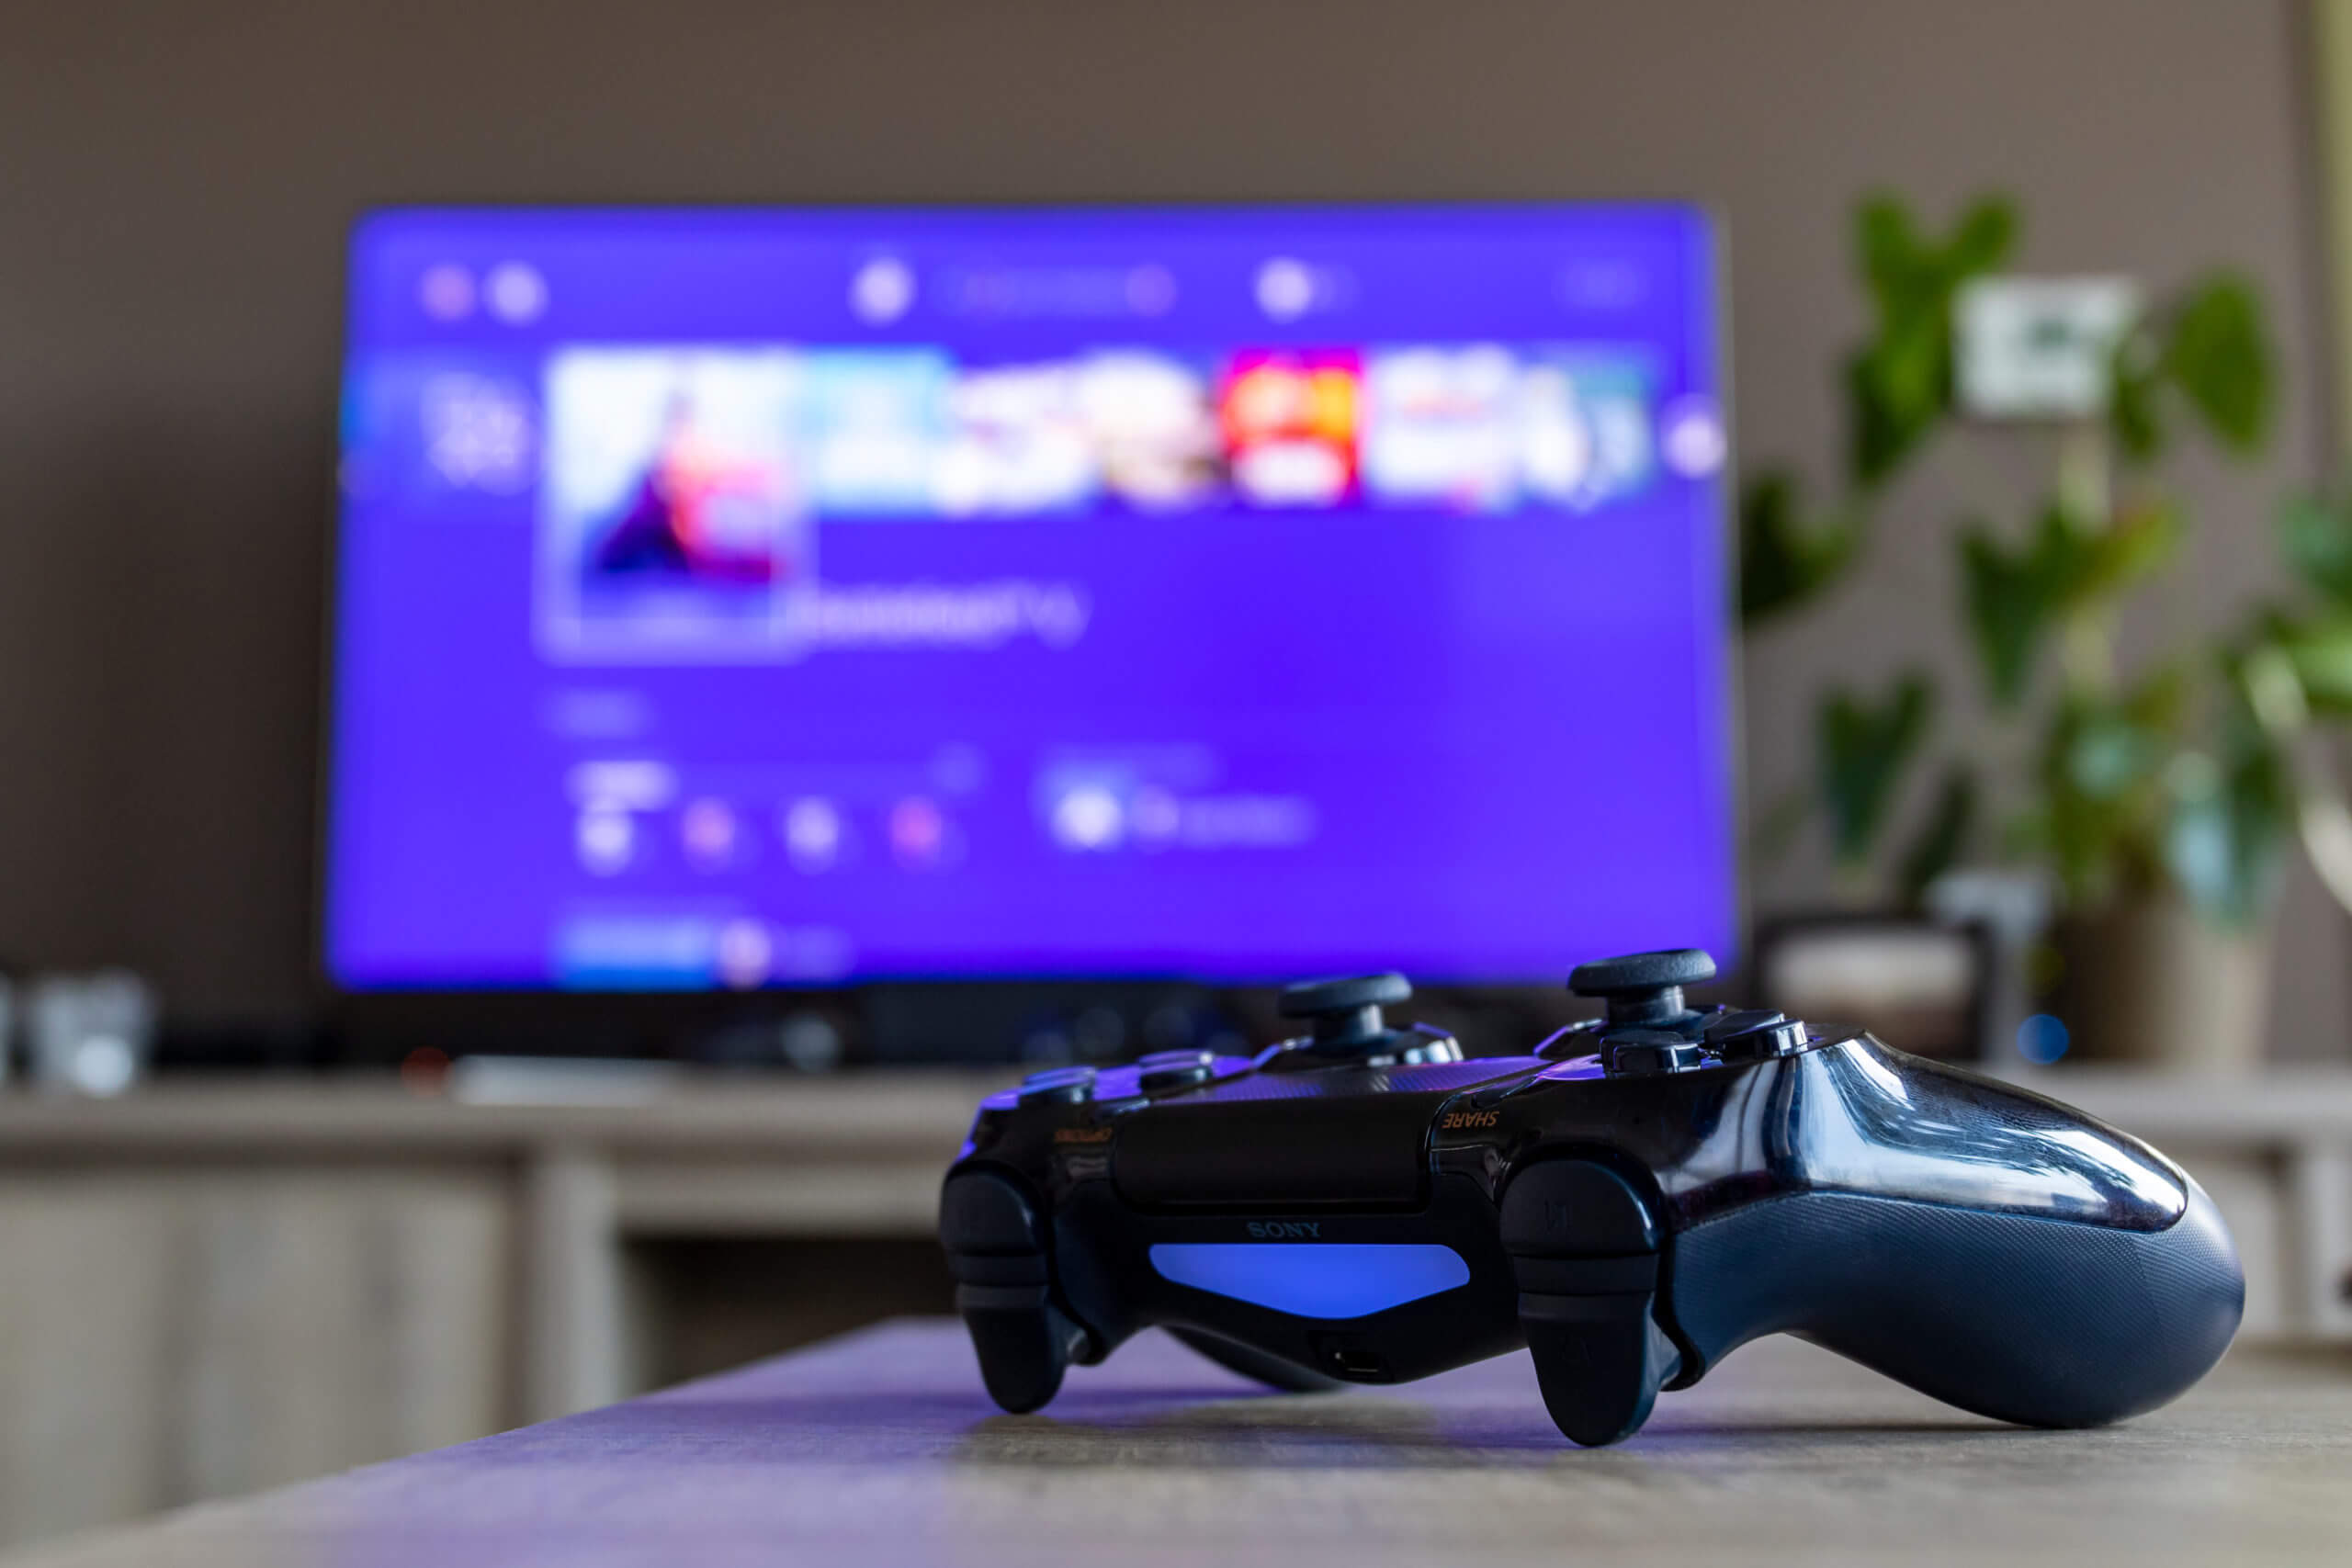 What to Do If Your PSN Account Is Compromised